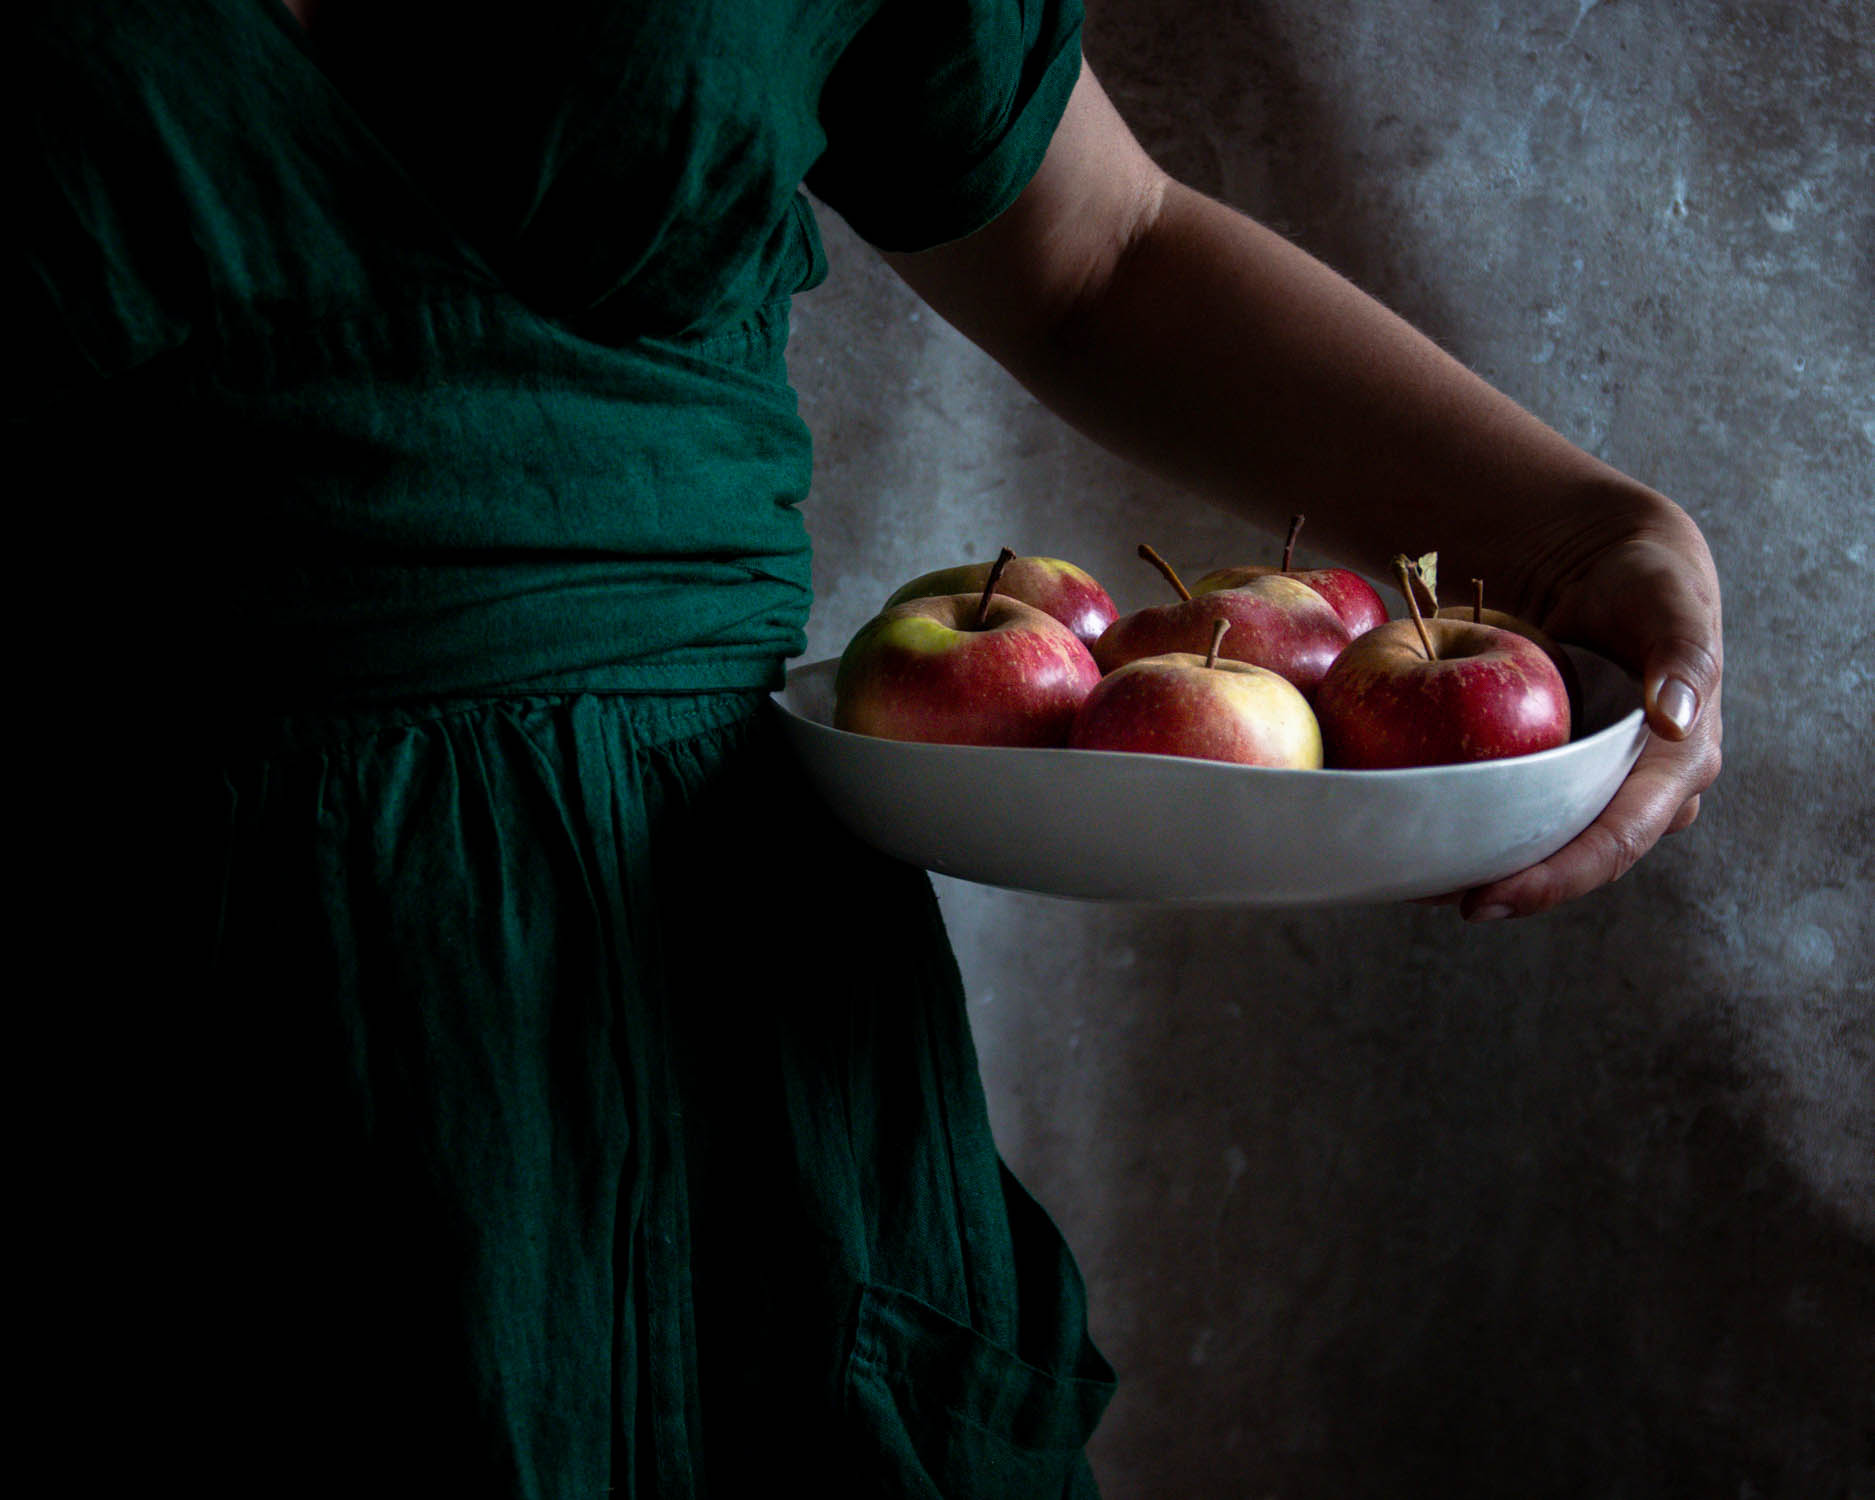 Holding a bowl of freshly picked apples